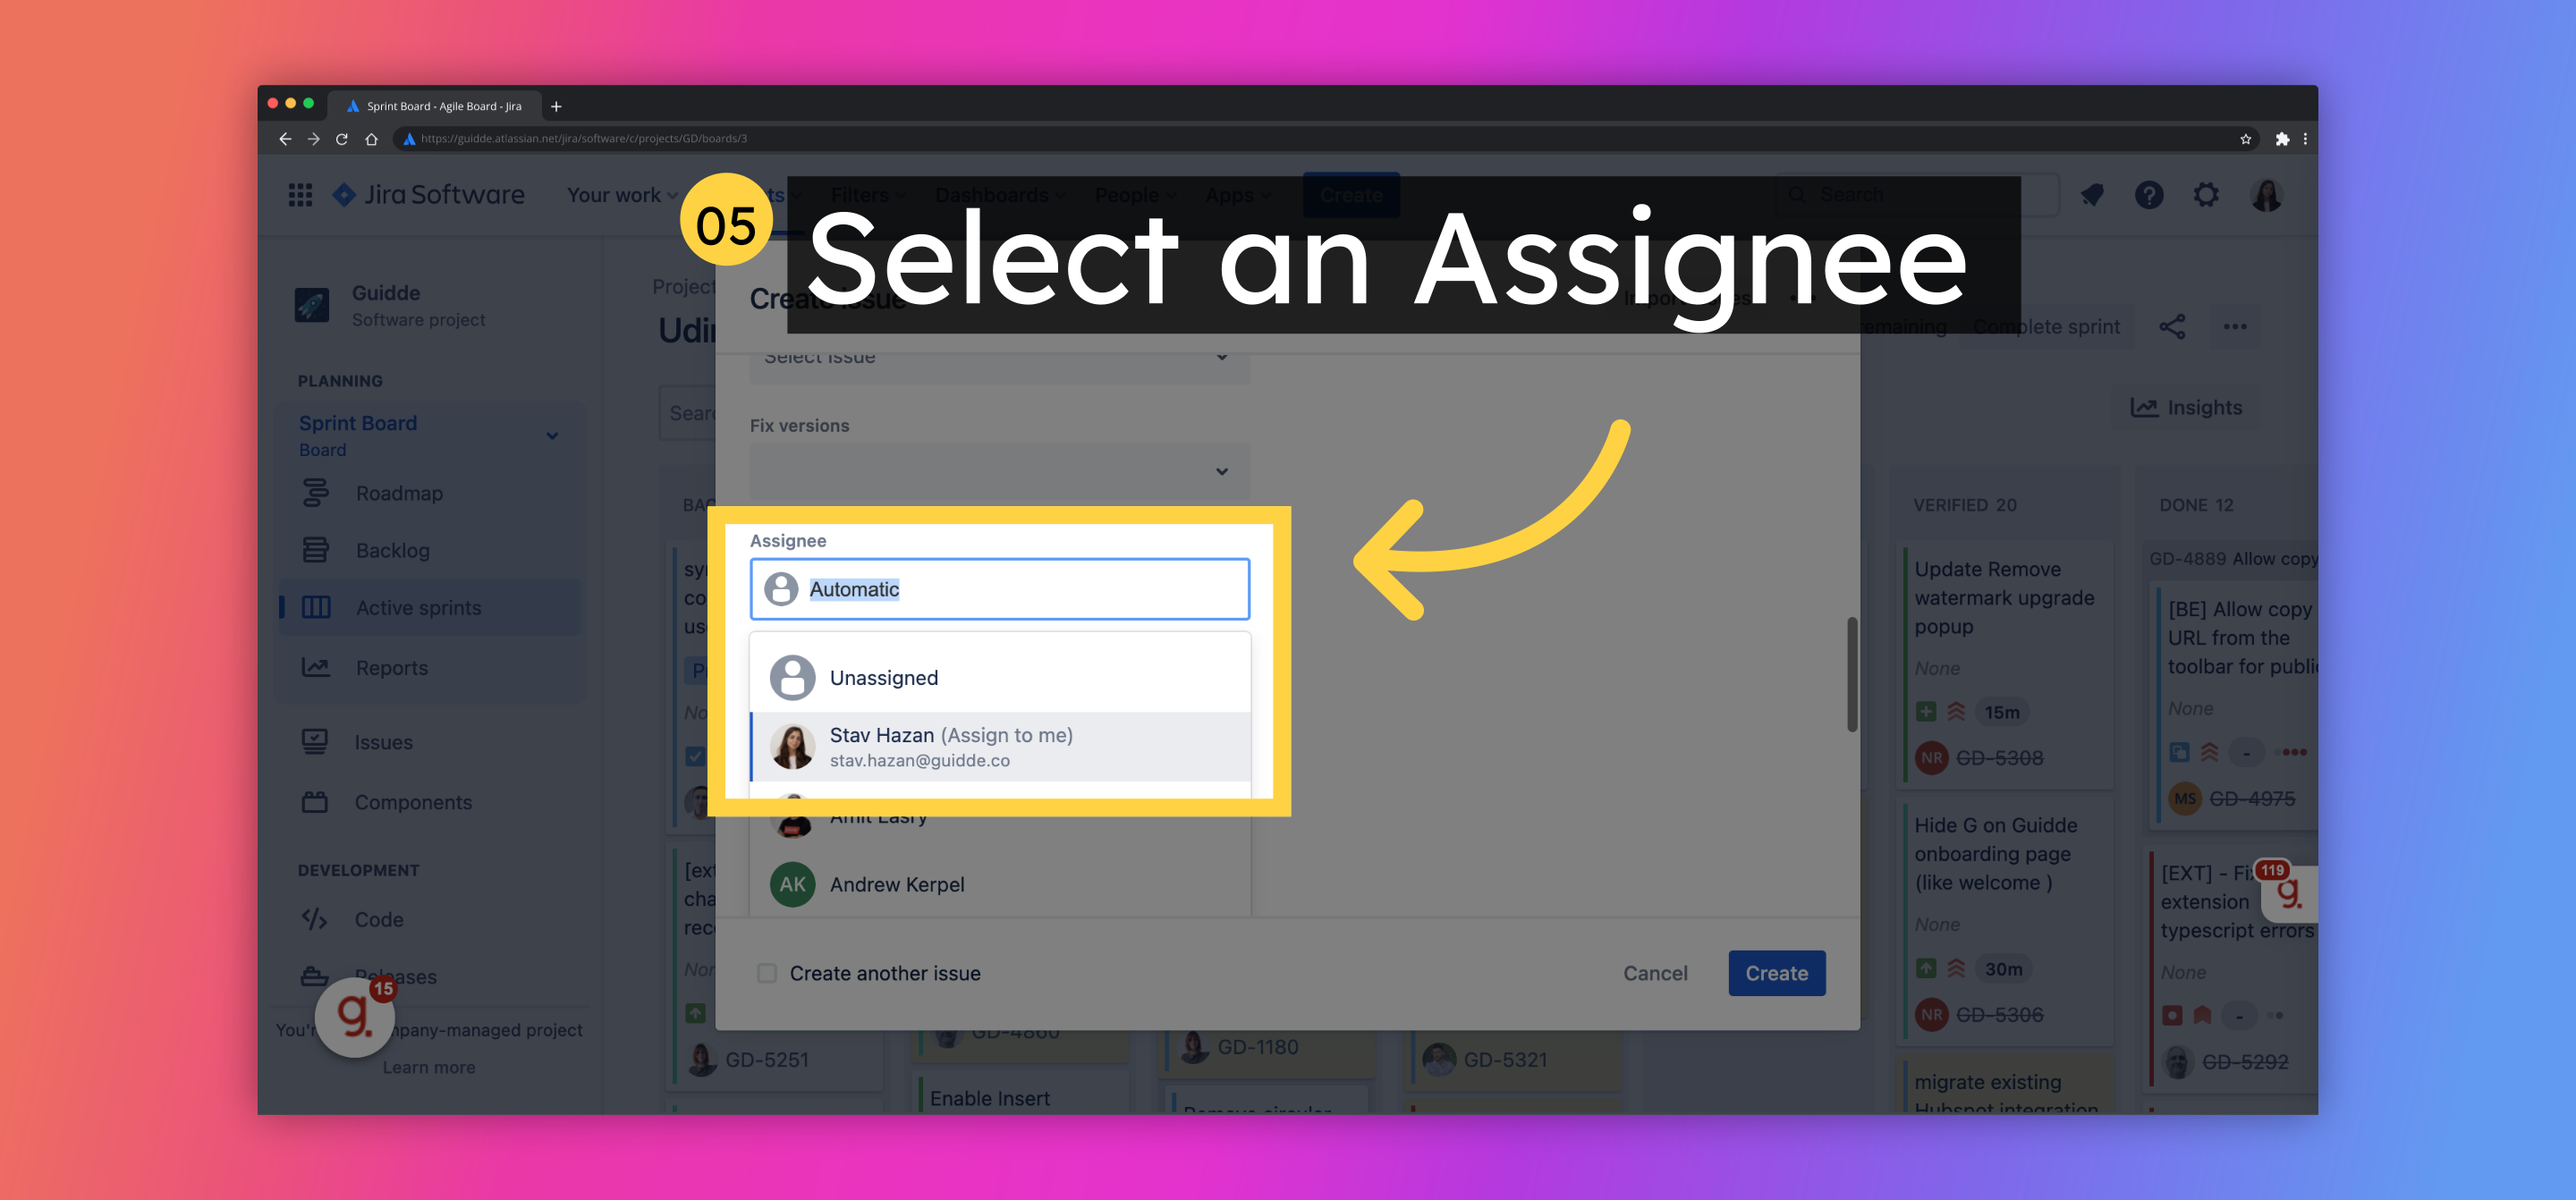 Select an Assignee